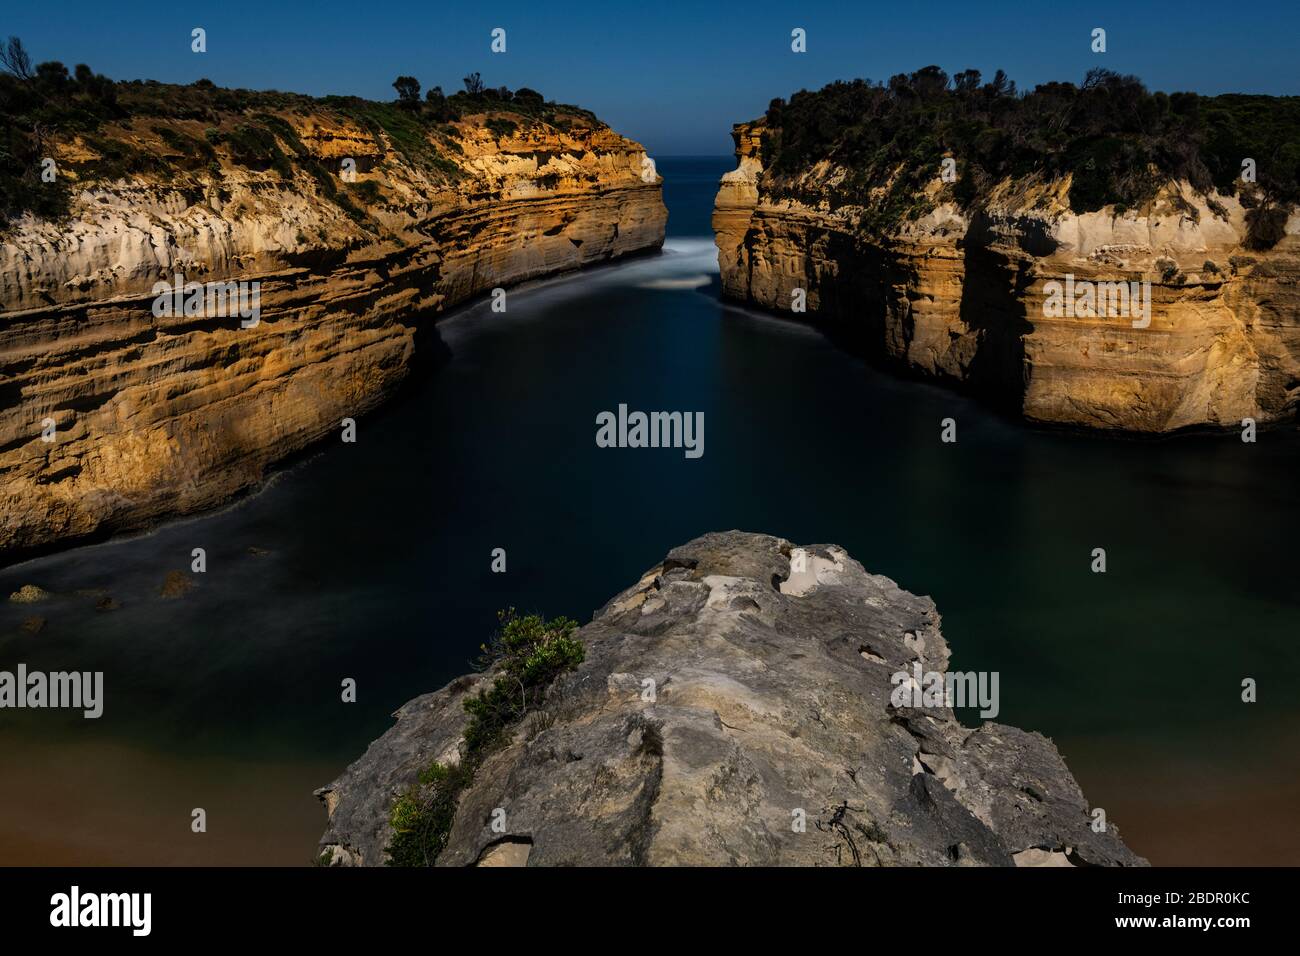 Nightly capture of Loch Ard Gorge under the light of full moon. Stock Photo